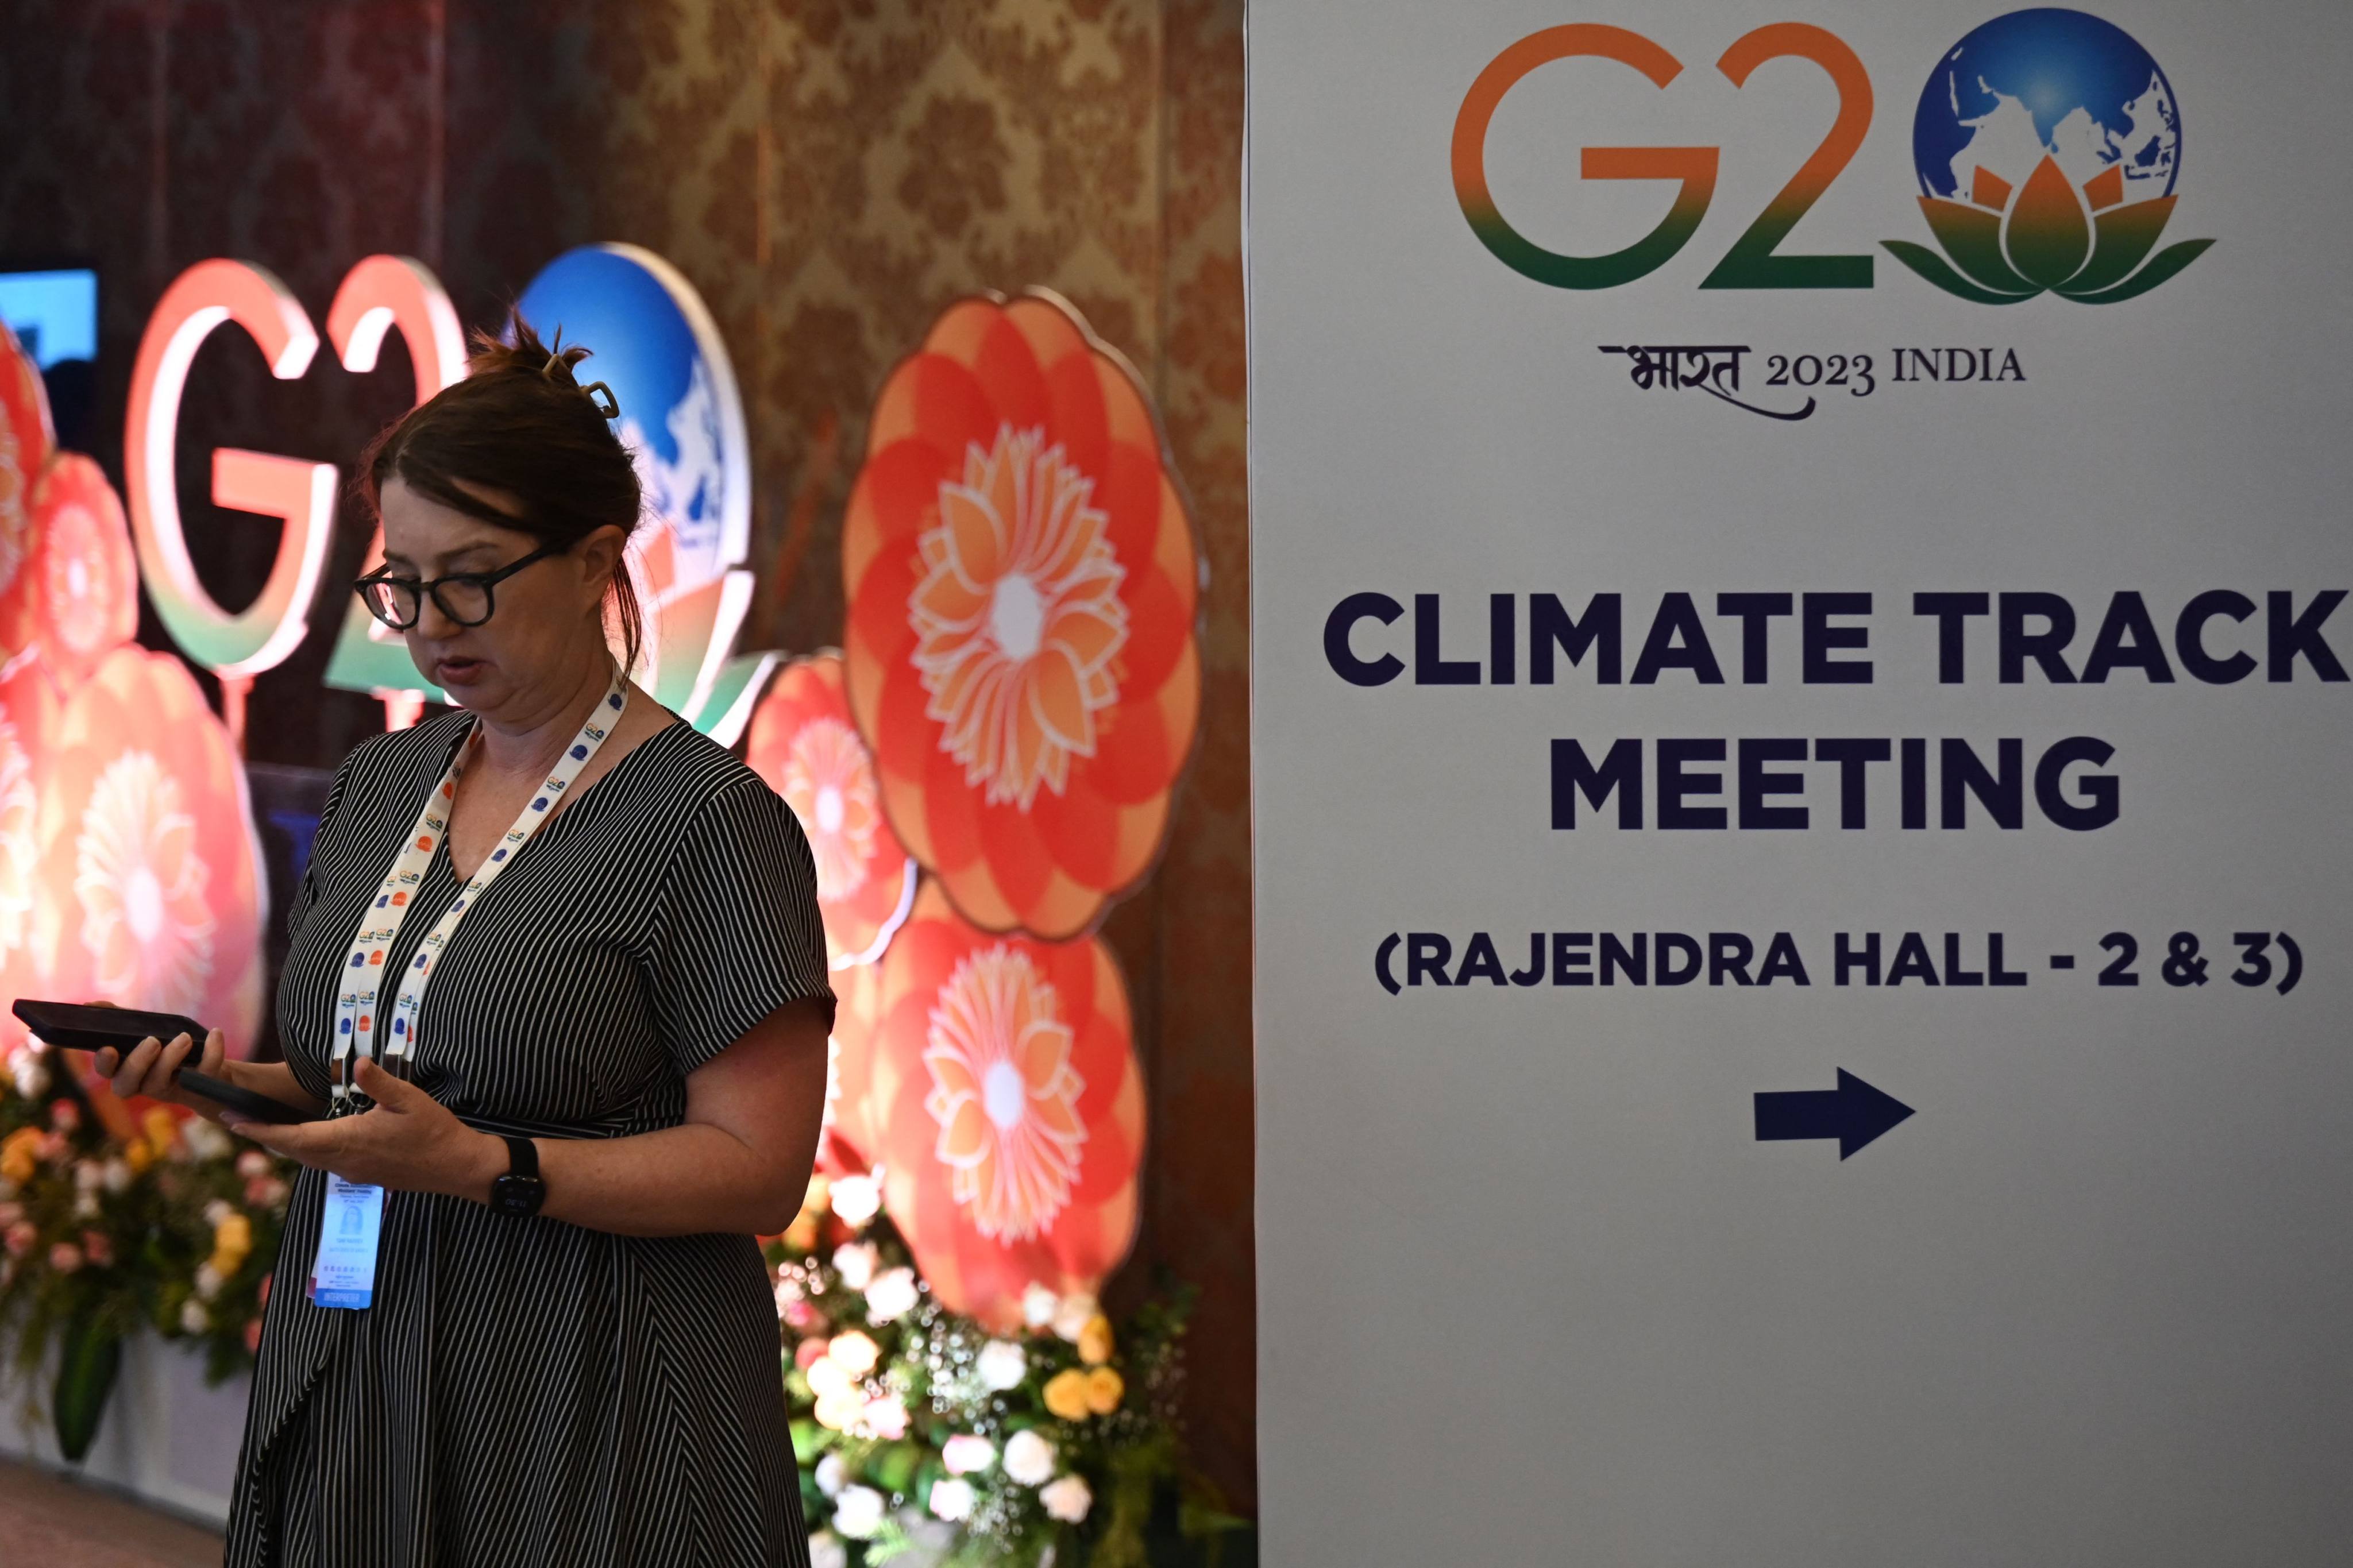 A delegate is seen at the G20 environmental and climate sustainability ministers’ meeting in Chennai on July 28, where ministers failed to agree on targets to reduce emissions and accelerate the energy transition. Photo: AFP